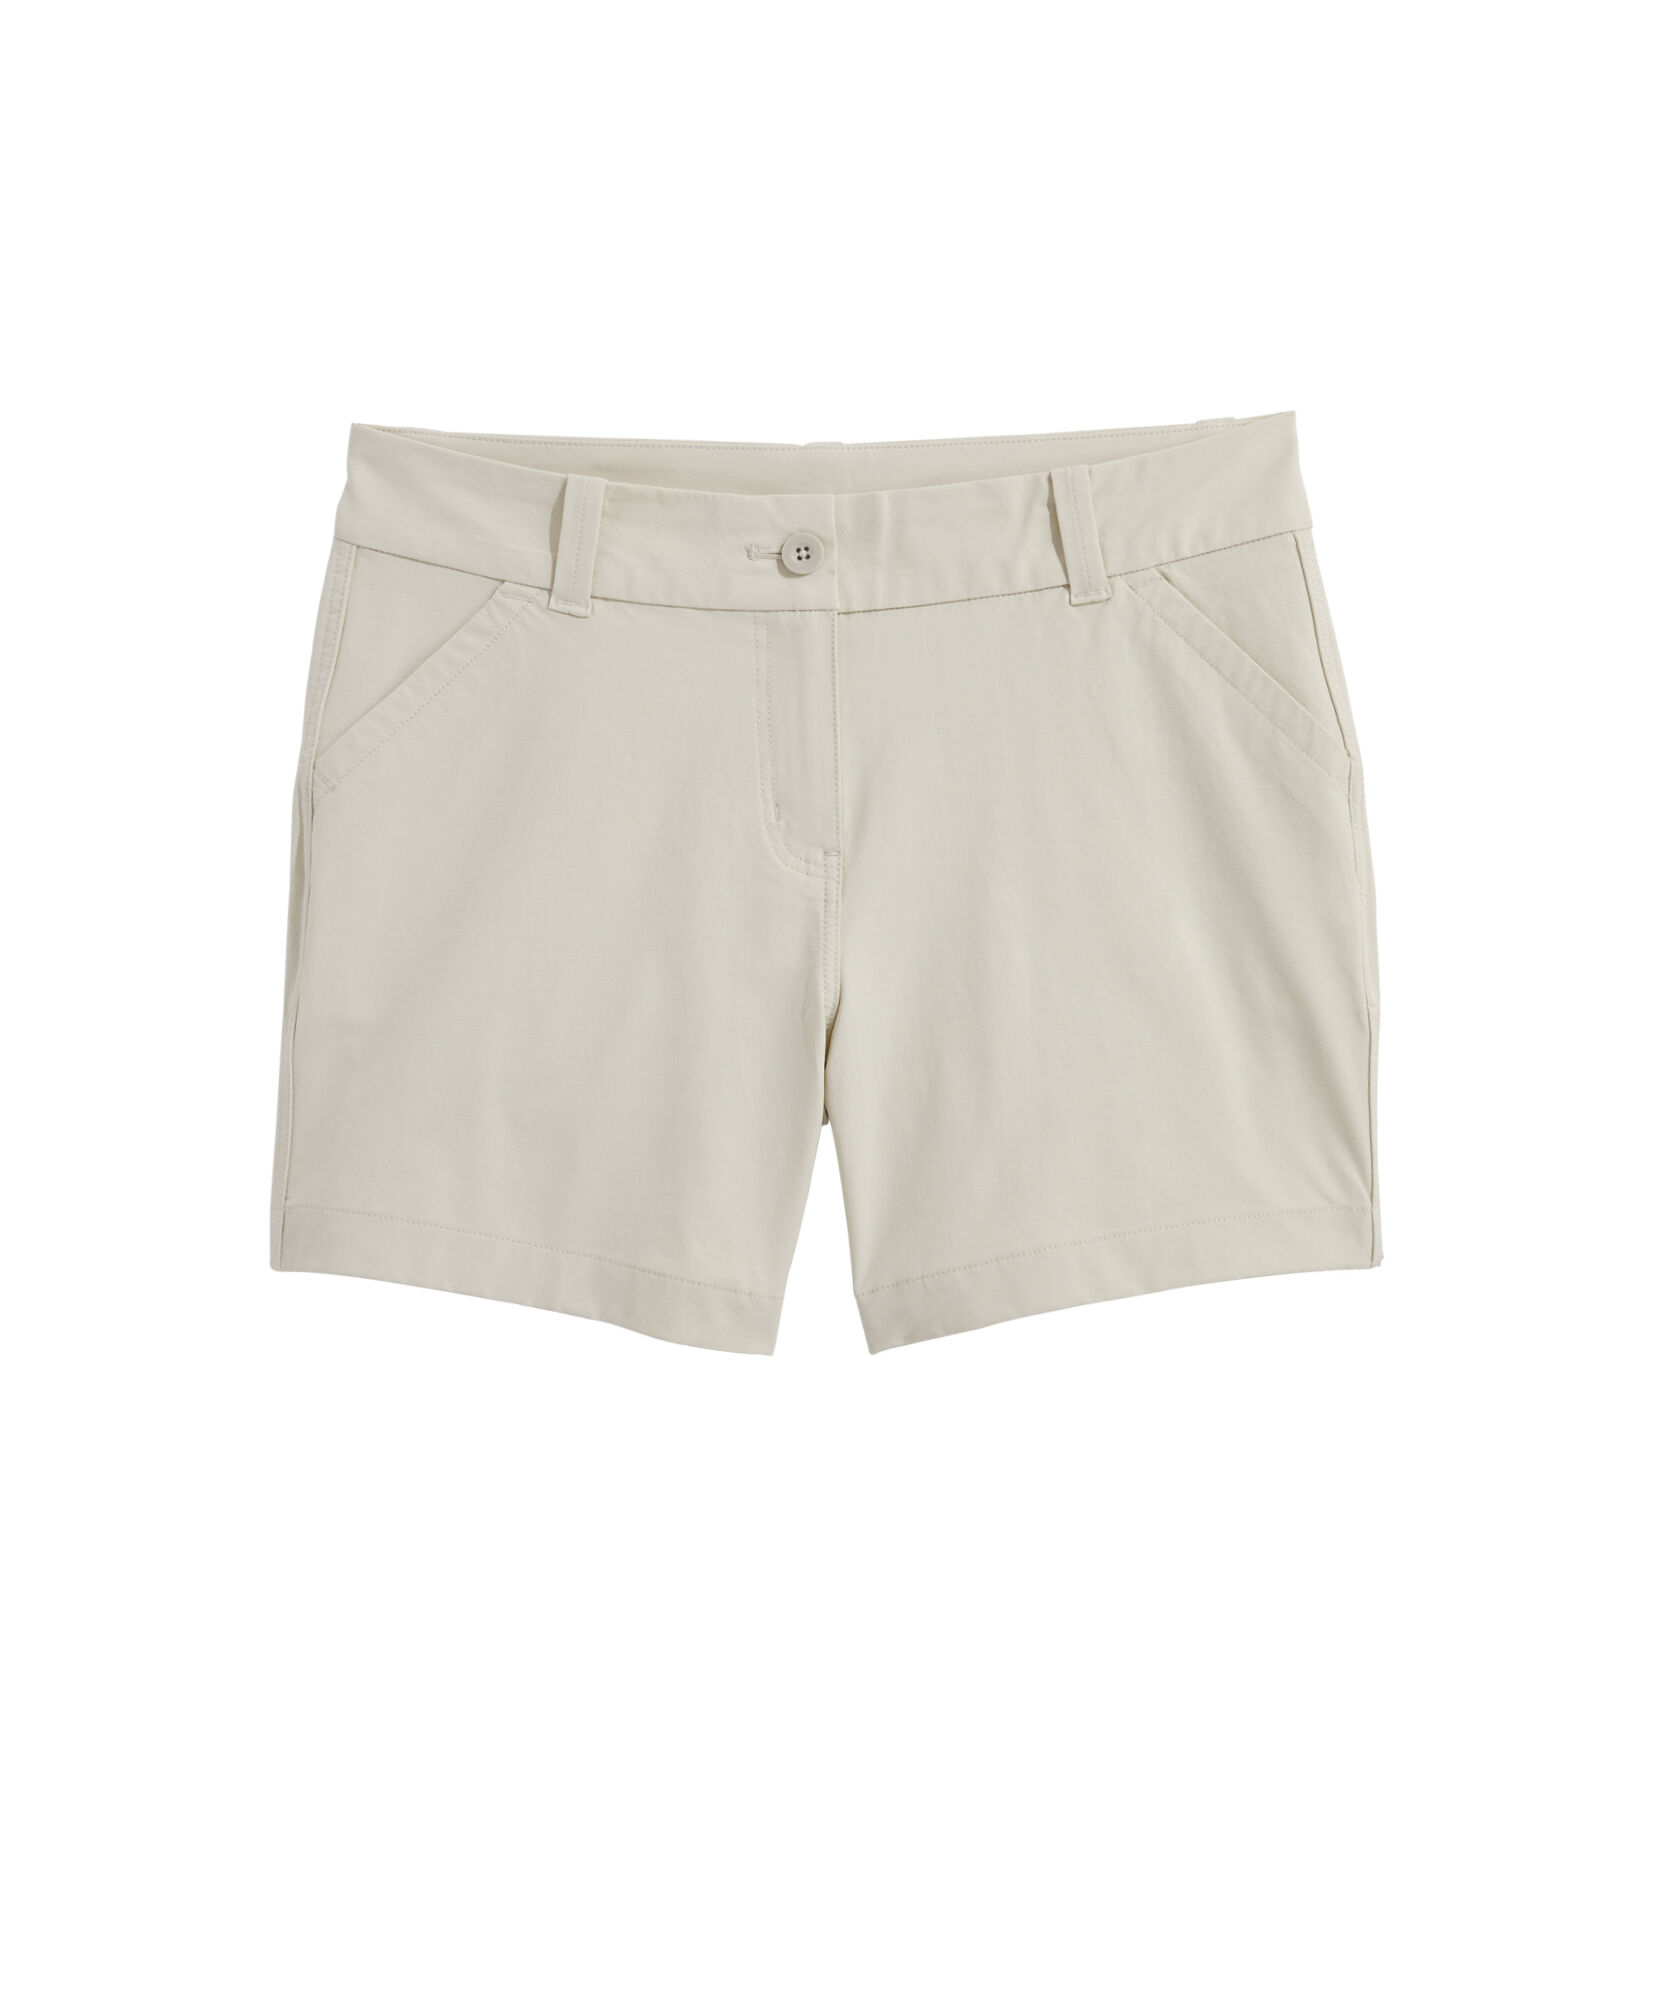 OUTLET 5 Inch Performance Every Day Shorts